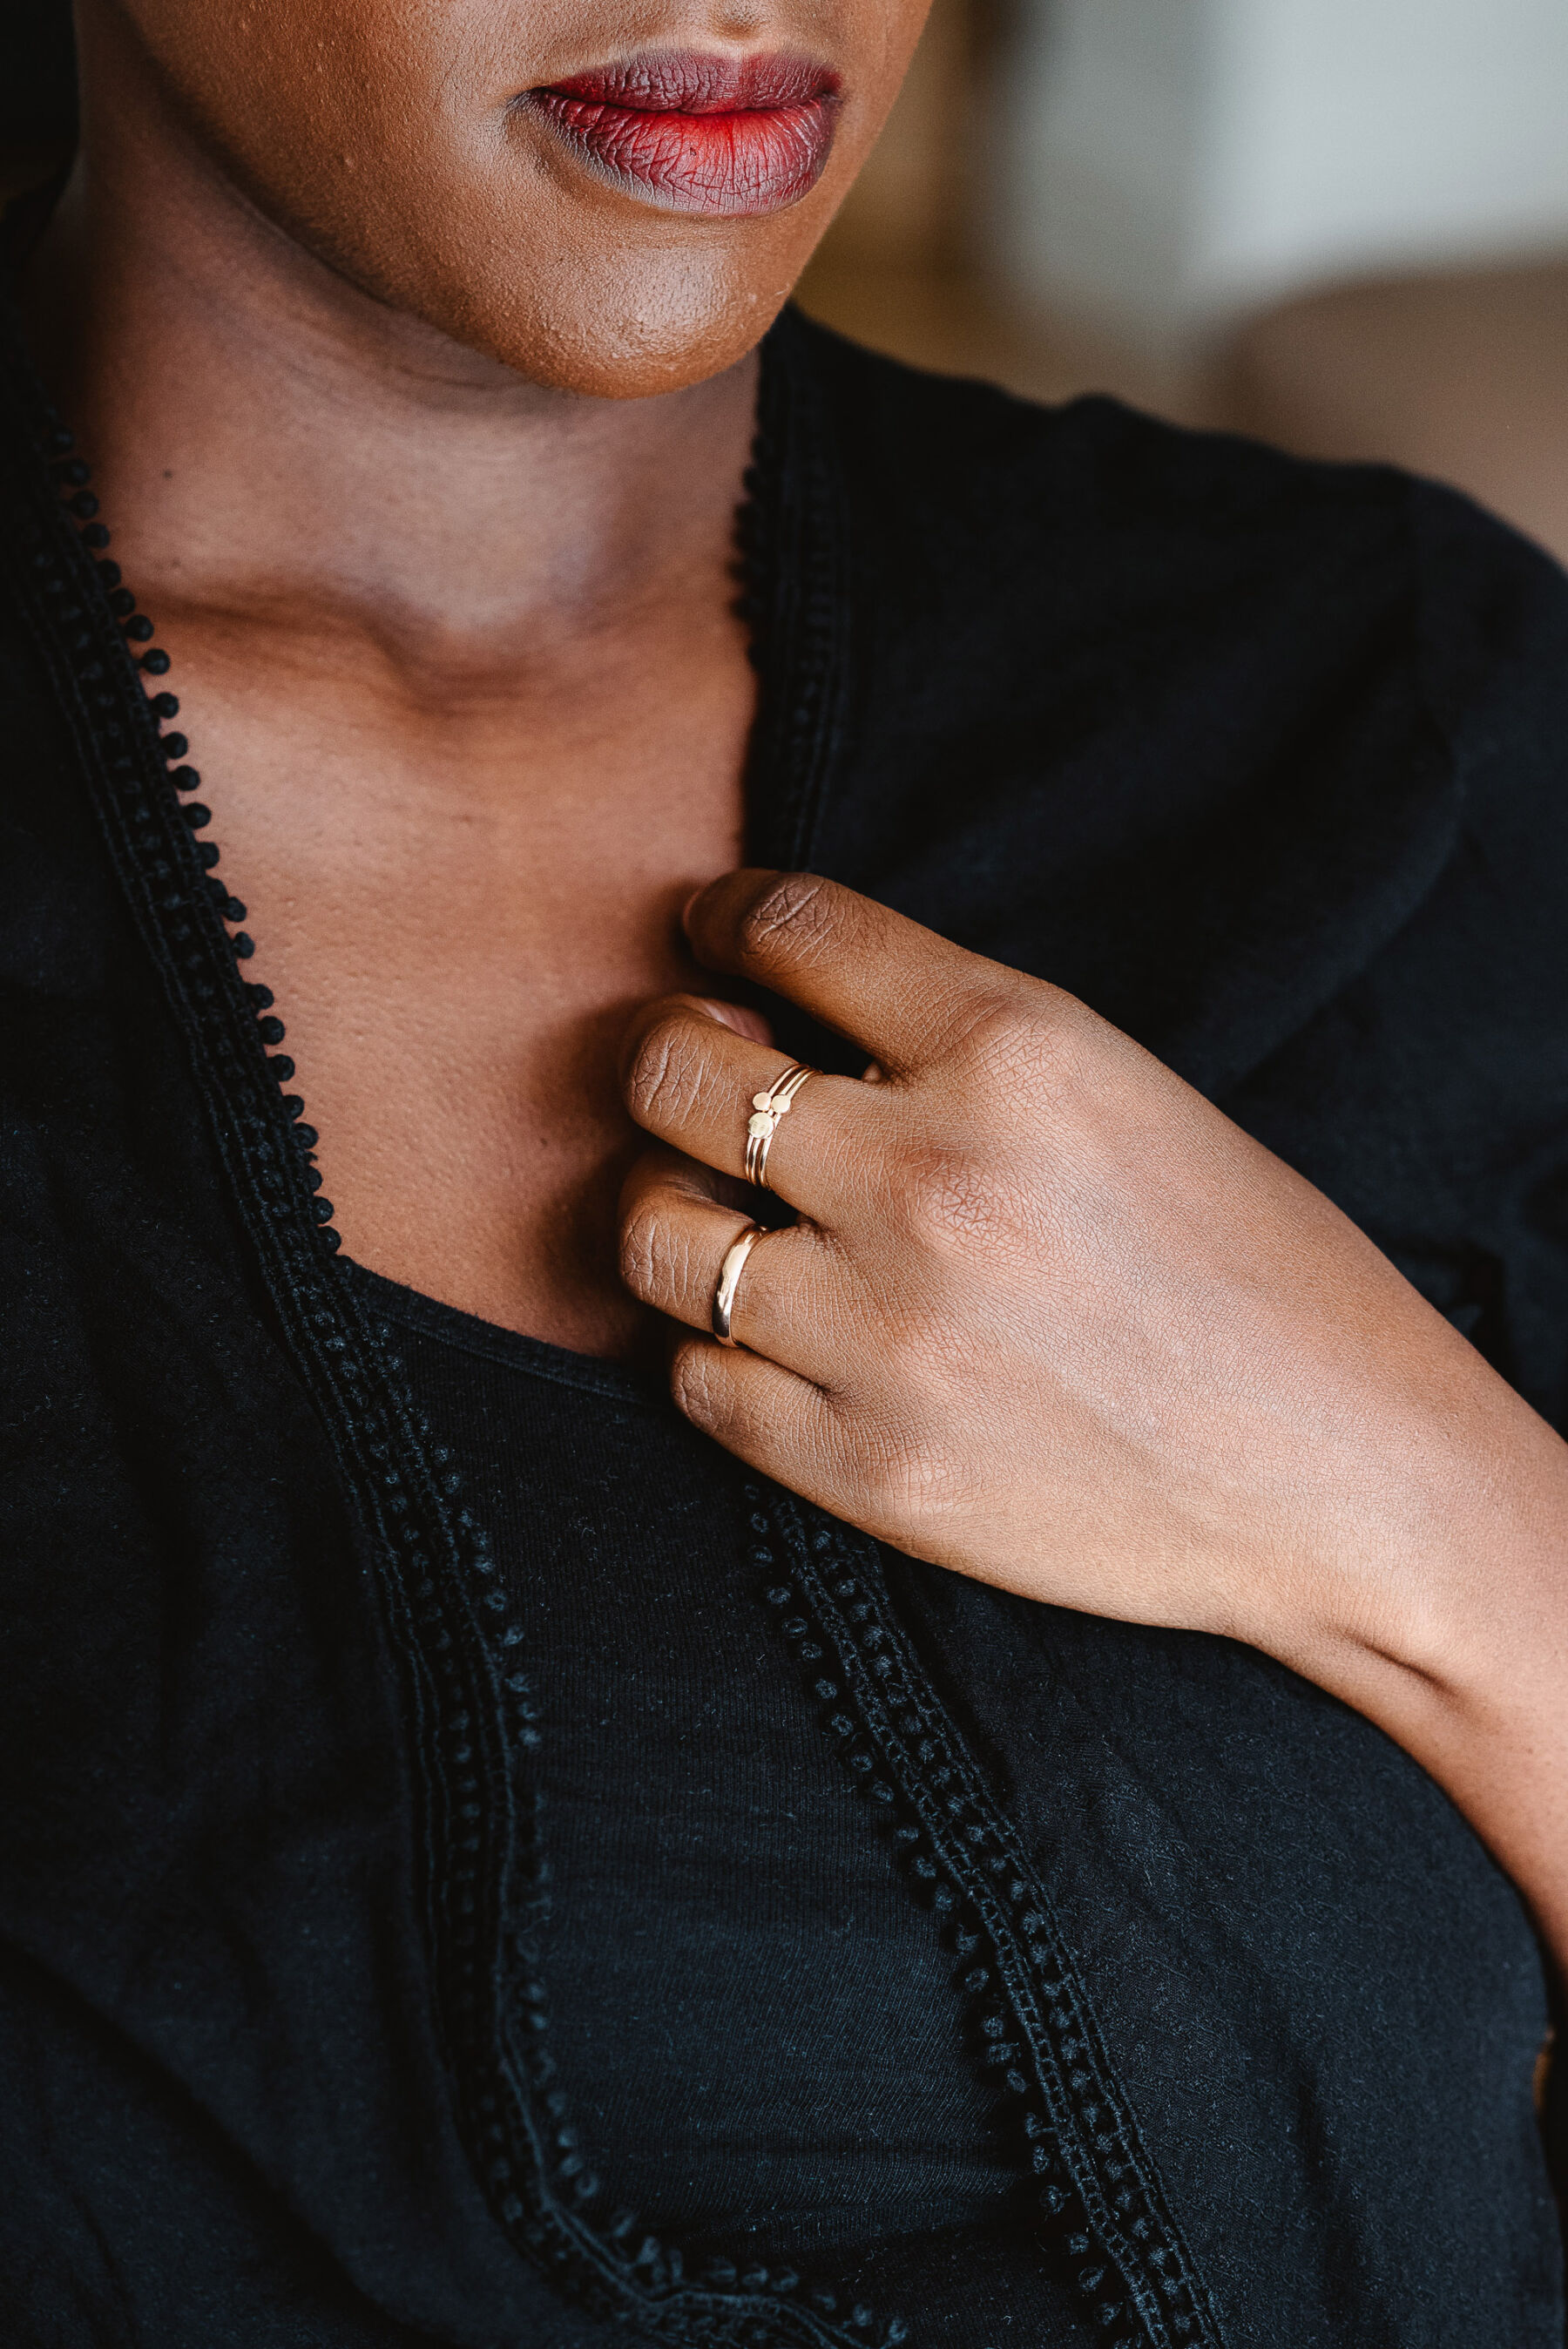 Black woman wearing ethical fairtrade gold rings by Nikki Stark Jewellery